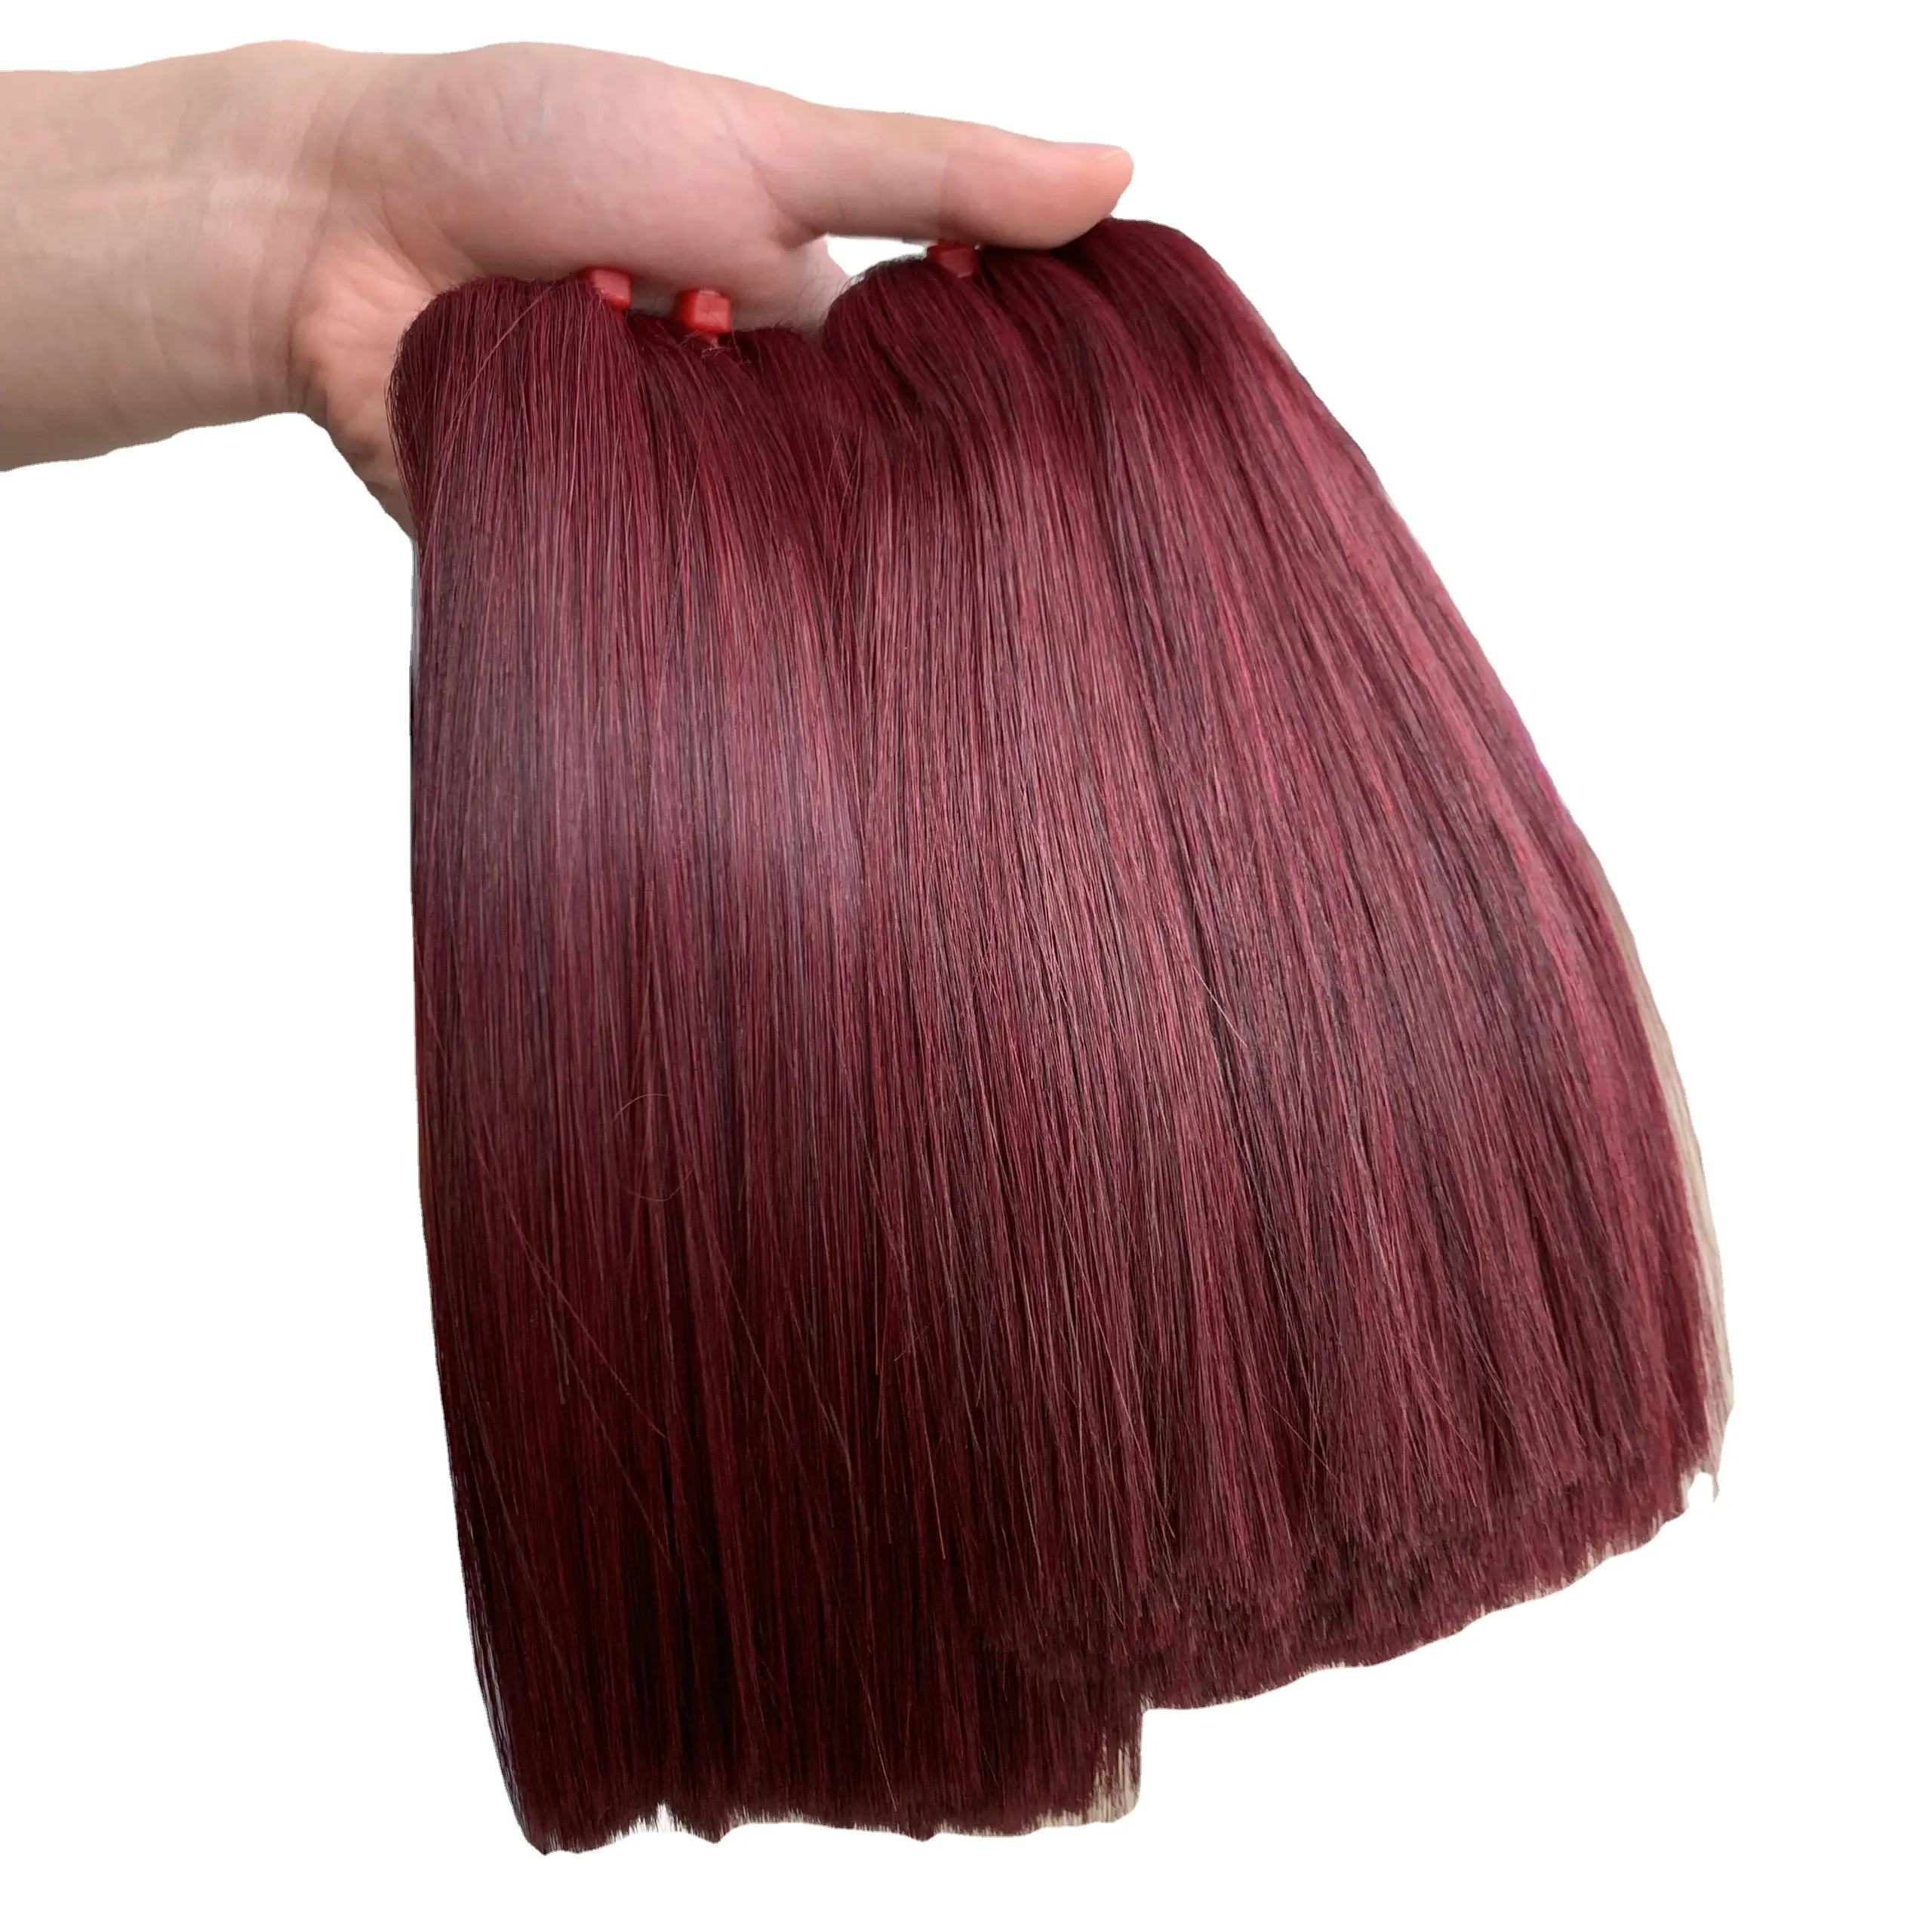 Ombre brown red color Bone straight hair super double drawn bundles and closure Human Hair soft silky remy hair Wholesale prices